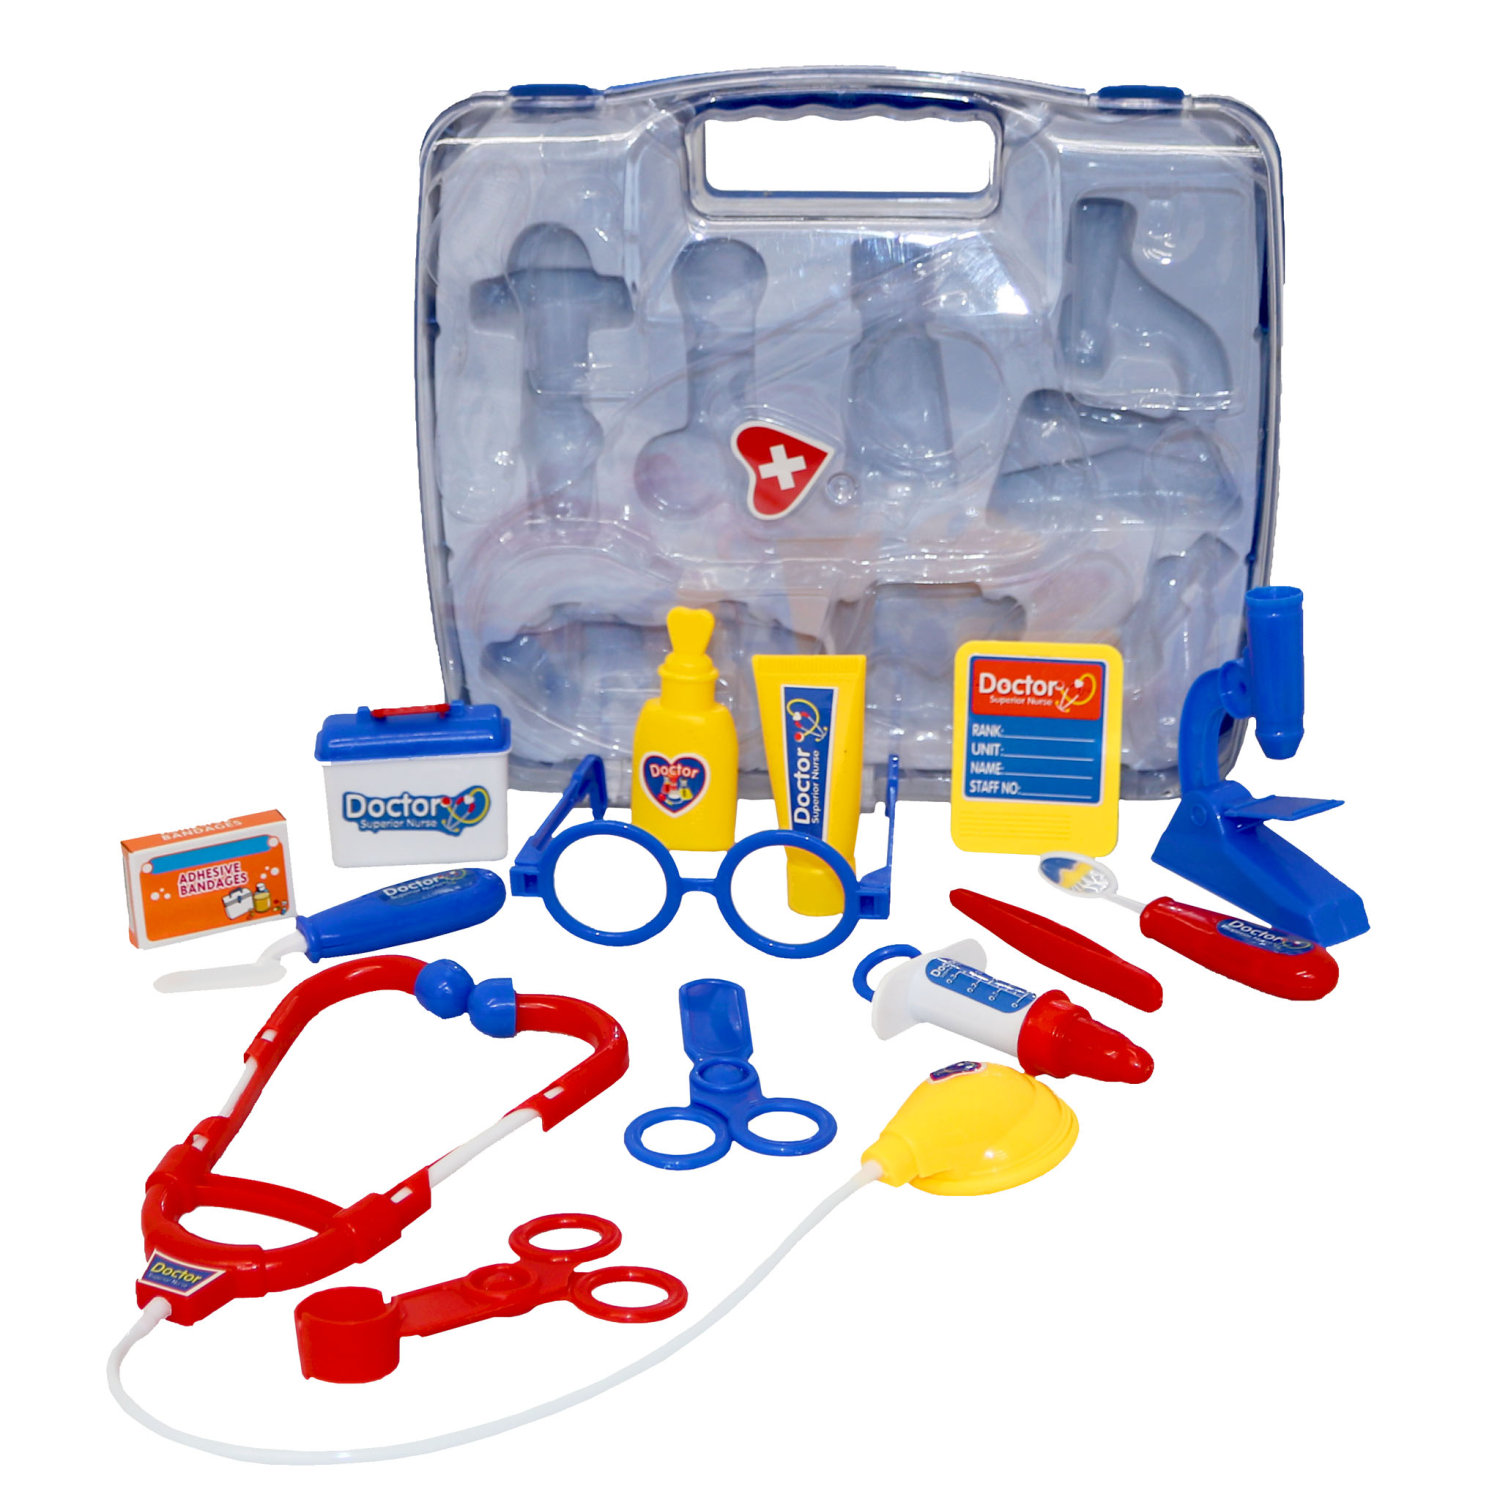 Papillon Gift Medical Medic Doctor Set Nurse Kit Kids Toy Role Play Carry Case by 1373116 